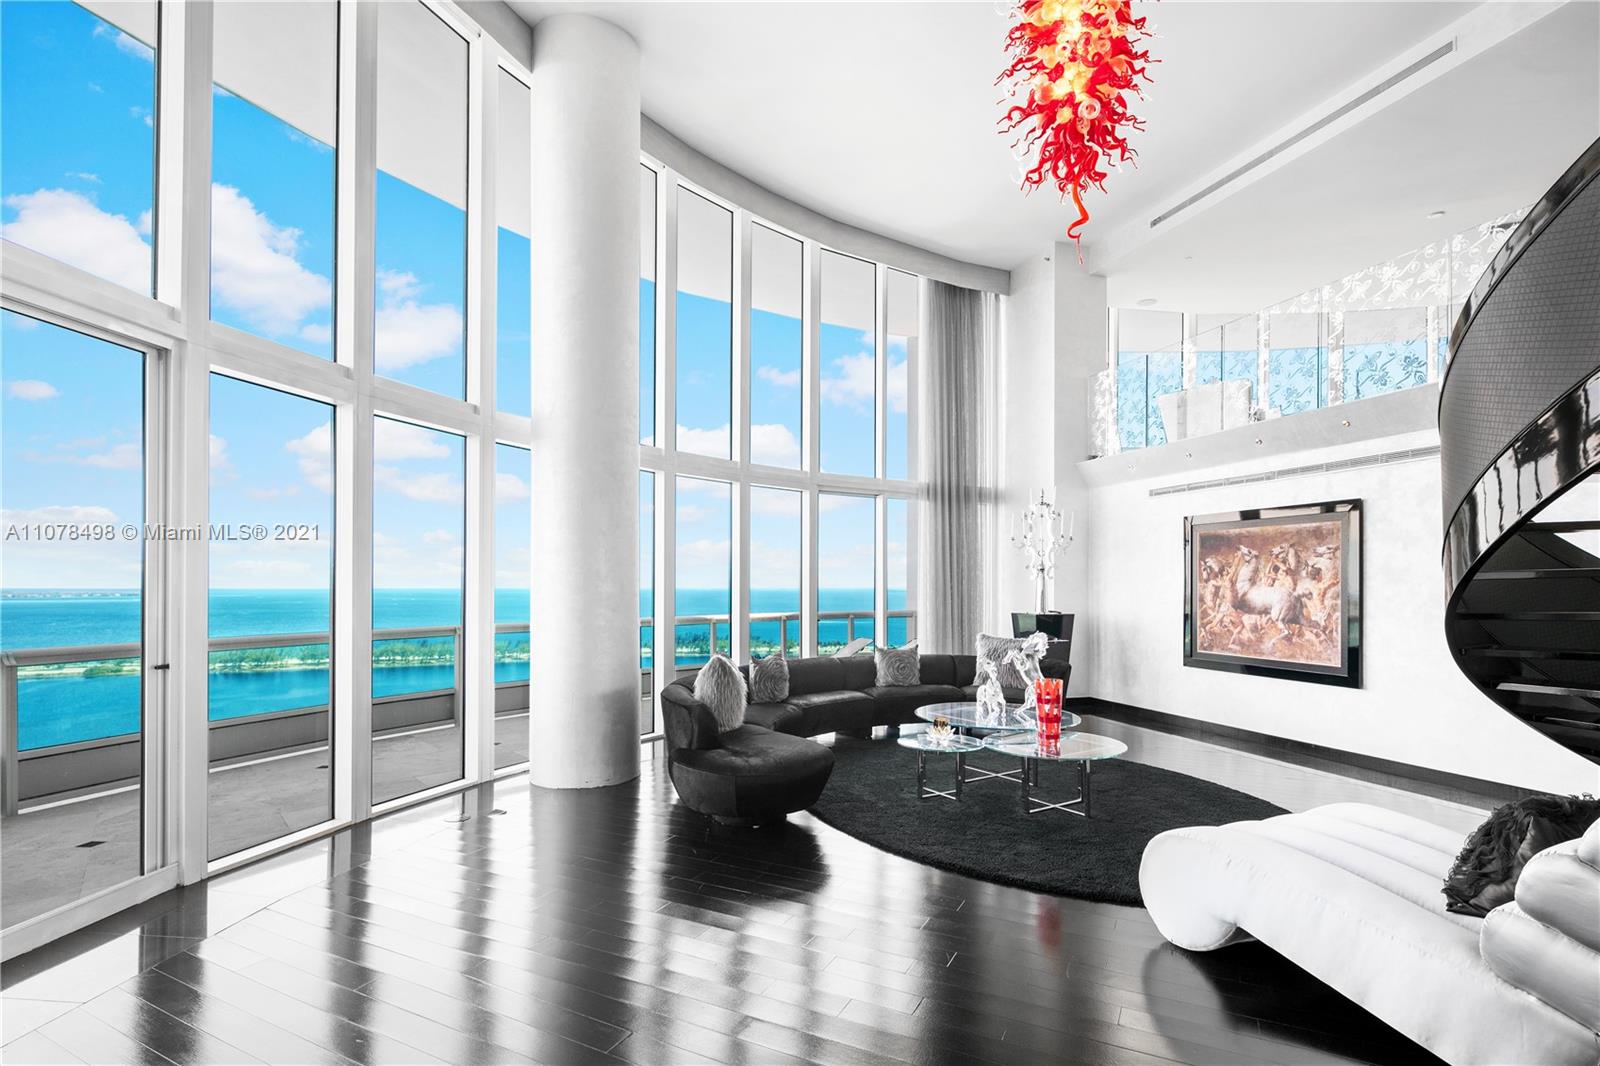 Located in one of the most sought-after addresses on the 31st floor in Brickell’s iconic Santa Maria Condominium, this one-of-a-kind 5,700+ SF two-story residence is a symbol of uncompromising elegance. Rise into the foyer of this 4-bedroom, 4.5-bathroom condo via the private elevator, and get swept away by the impressive ocean, bay and city views in each room as well as on the massive wrap-around balcony perfect for viewing sunrise or sunset. Exquisite black floors and floor-to-ceiling windows accentuate the customized living spaces and bathrooms, each with bespoke wallpaper, drapery, tiling, backsplash and cabinets offering a unique artistic flare. Price does not reflect the cost of the furniture and the fixtures. They must be purchased for an additional $150,000.00